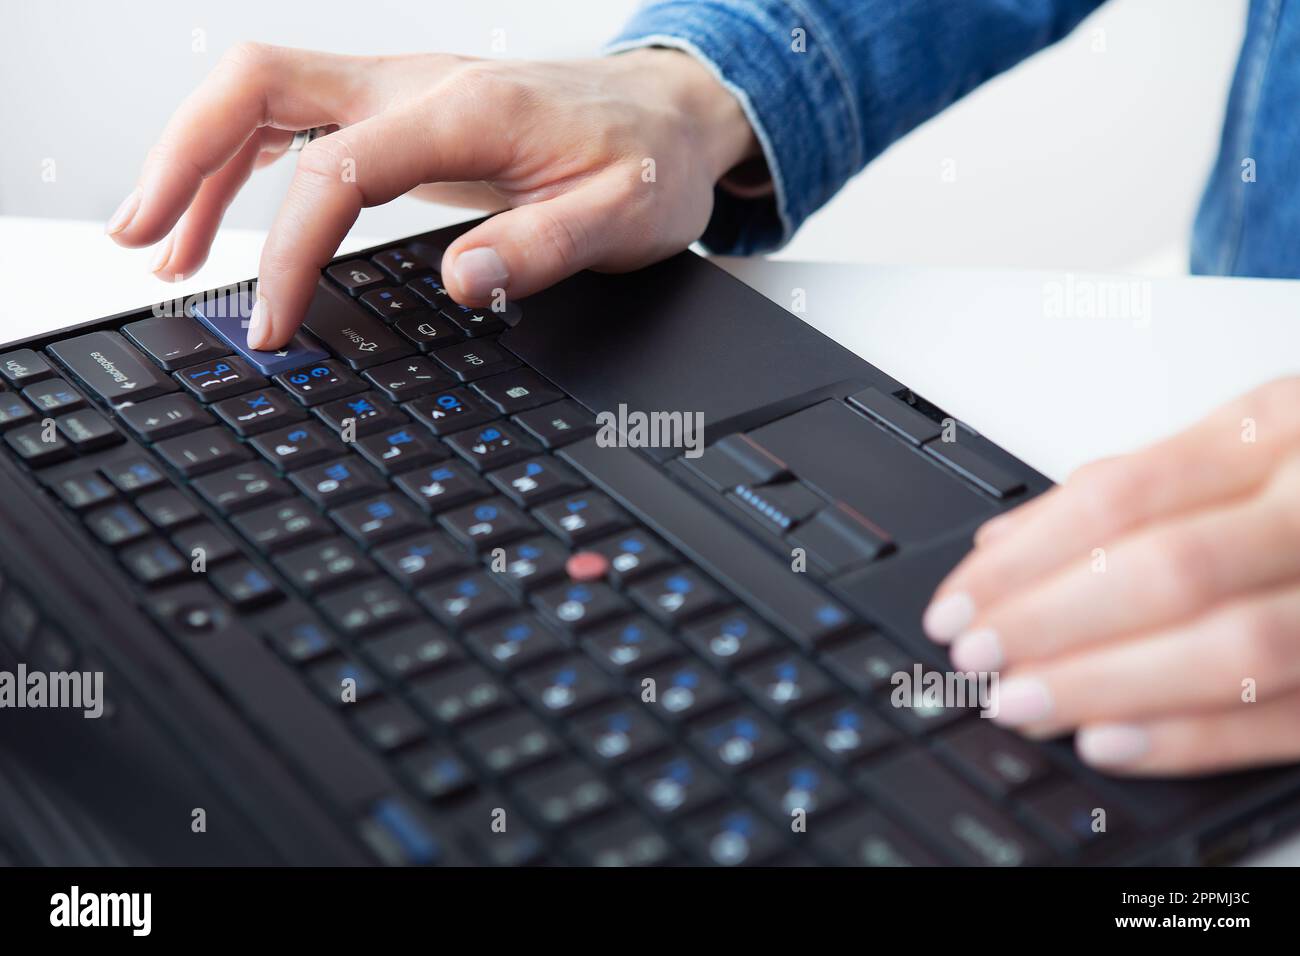 The girl is working on a laptop. Freelance, remote work, hands on the keyboard. View from above. Stock Photo